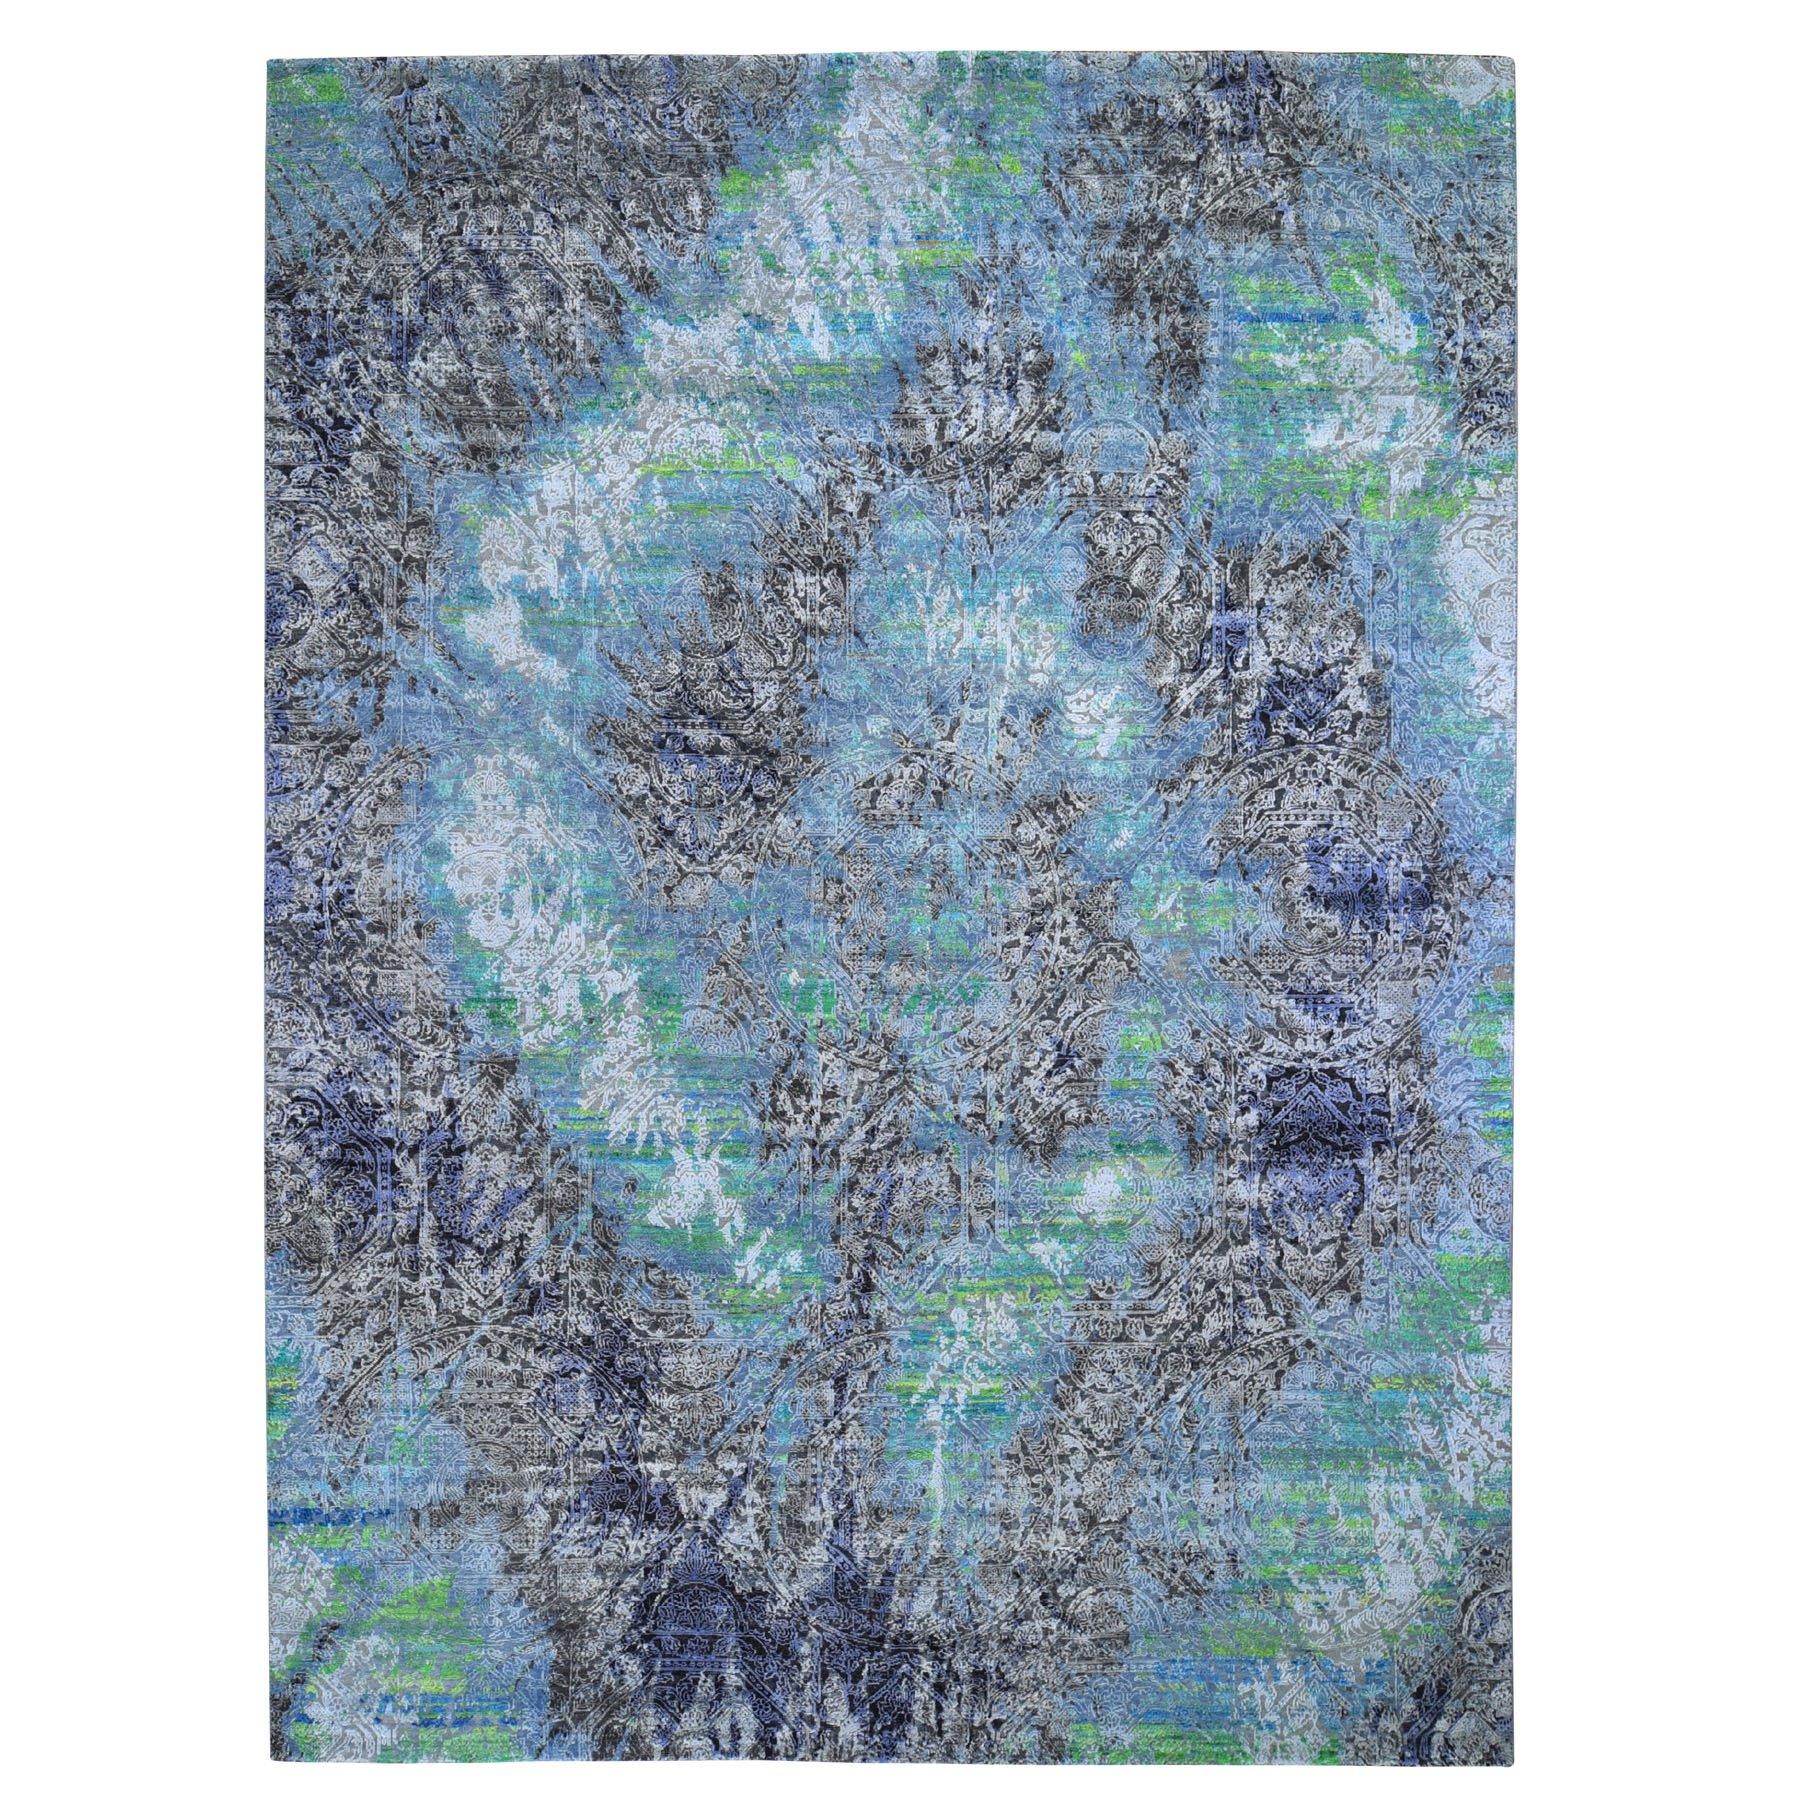 8-10 x12-5  COLORFUL DIMINISHING COINS, Sari Silk with Textured Wool Hand-Knotted Rug 